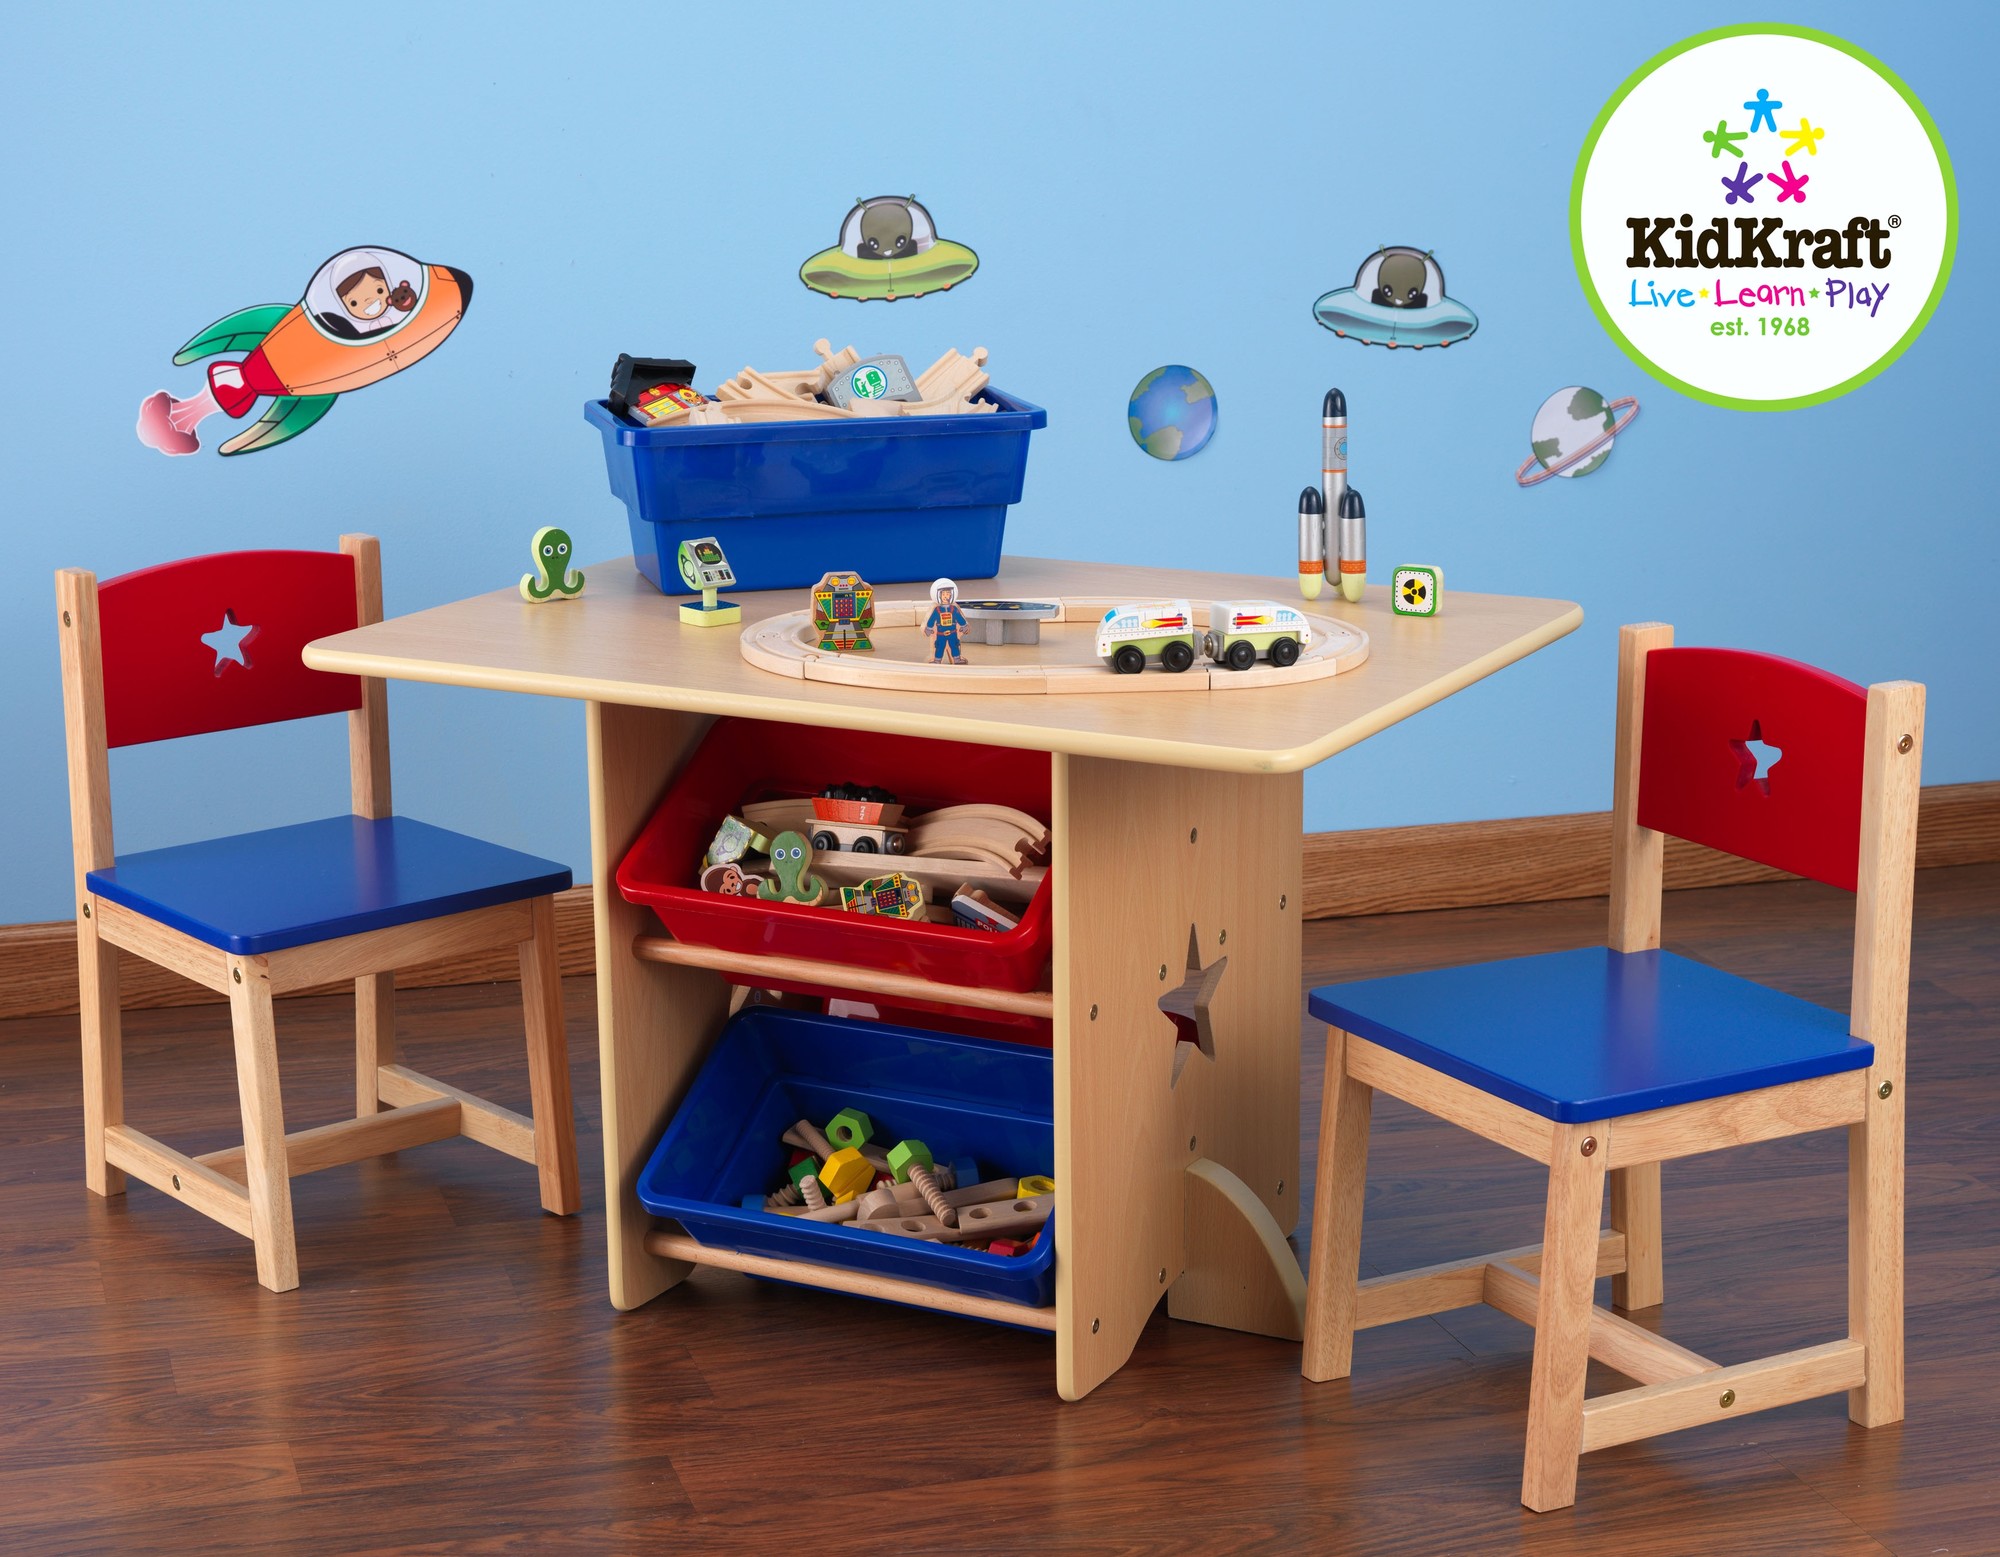 toddlers chair and table set